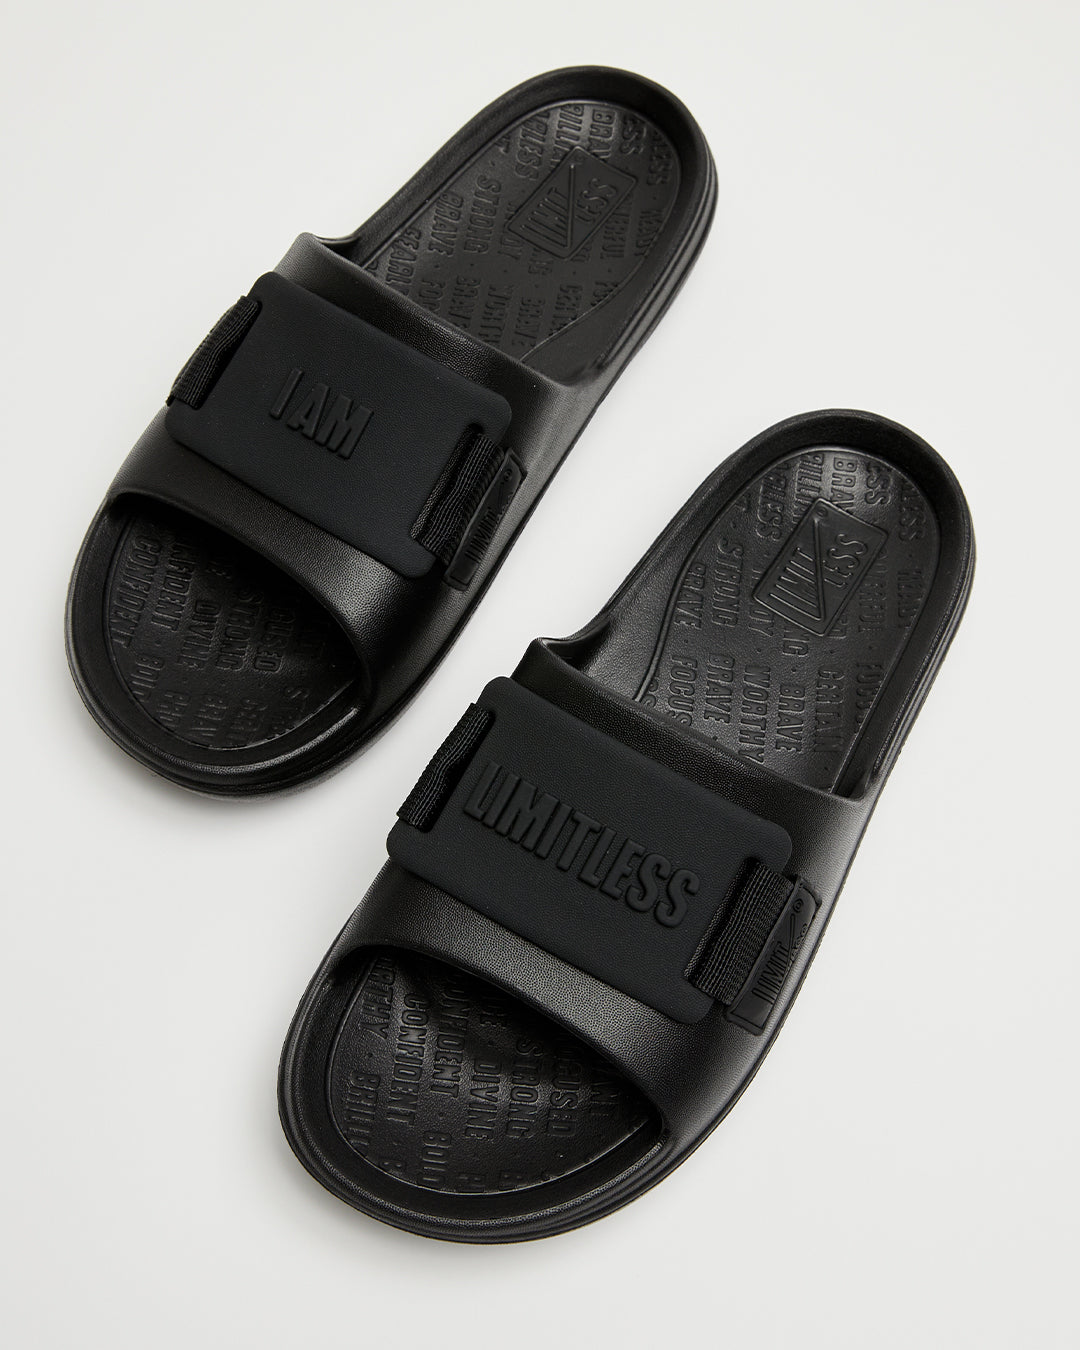 LIMITLESS SLIDES™ WITH ESSENTIAL TIBAH™ QUAD - LITTLE CHUTE HIGH SCHOOL EDITION